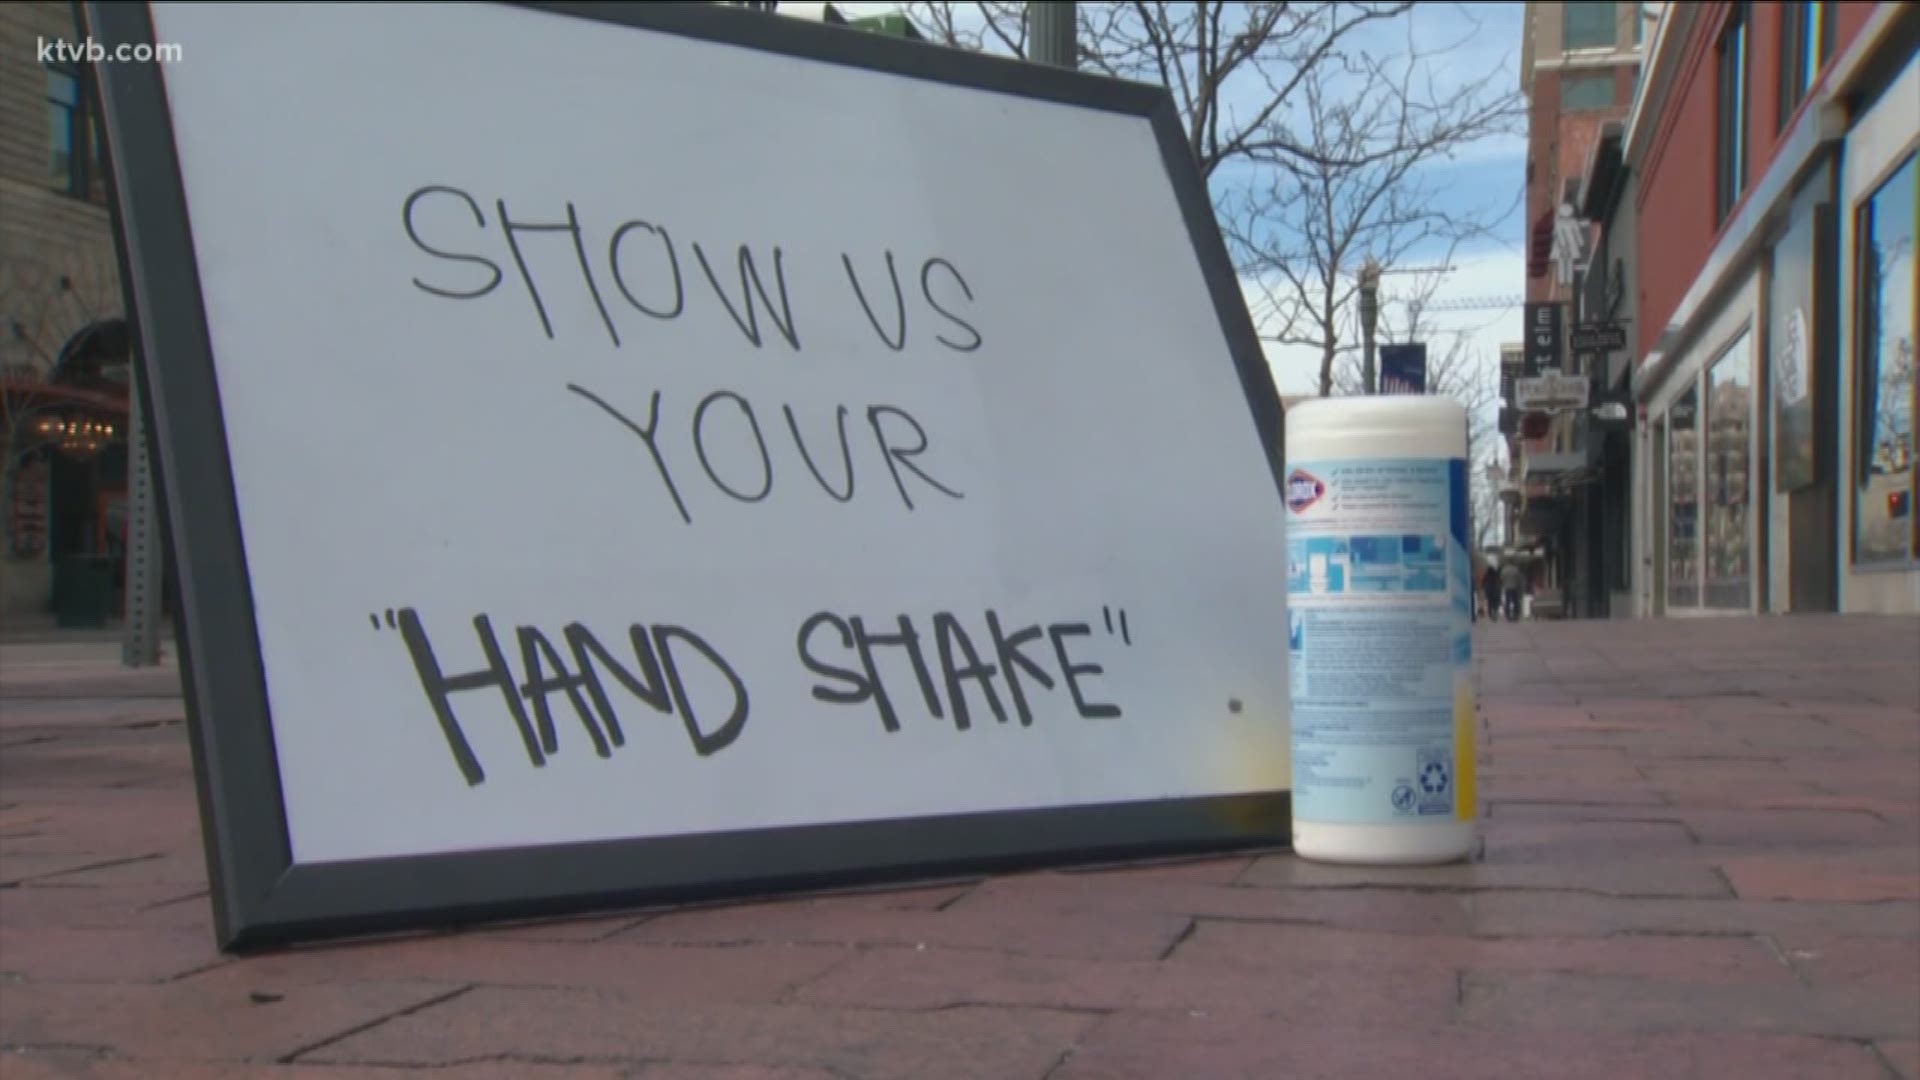 We went to downtown Boise and asked people how they're greeting people without shaking hands.